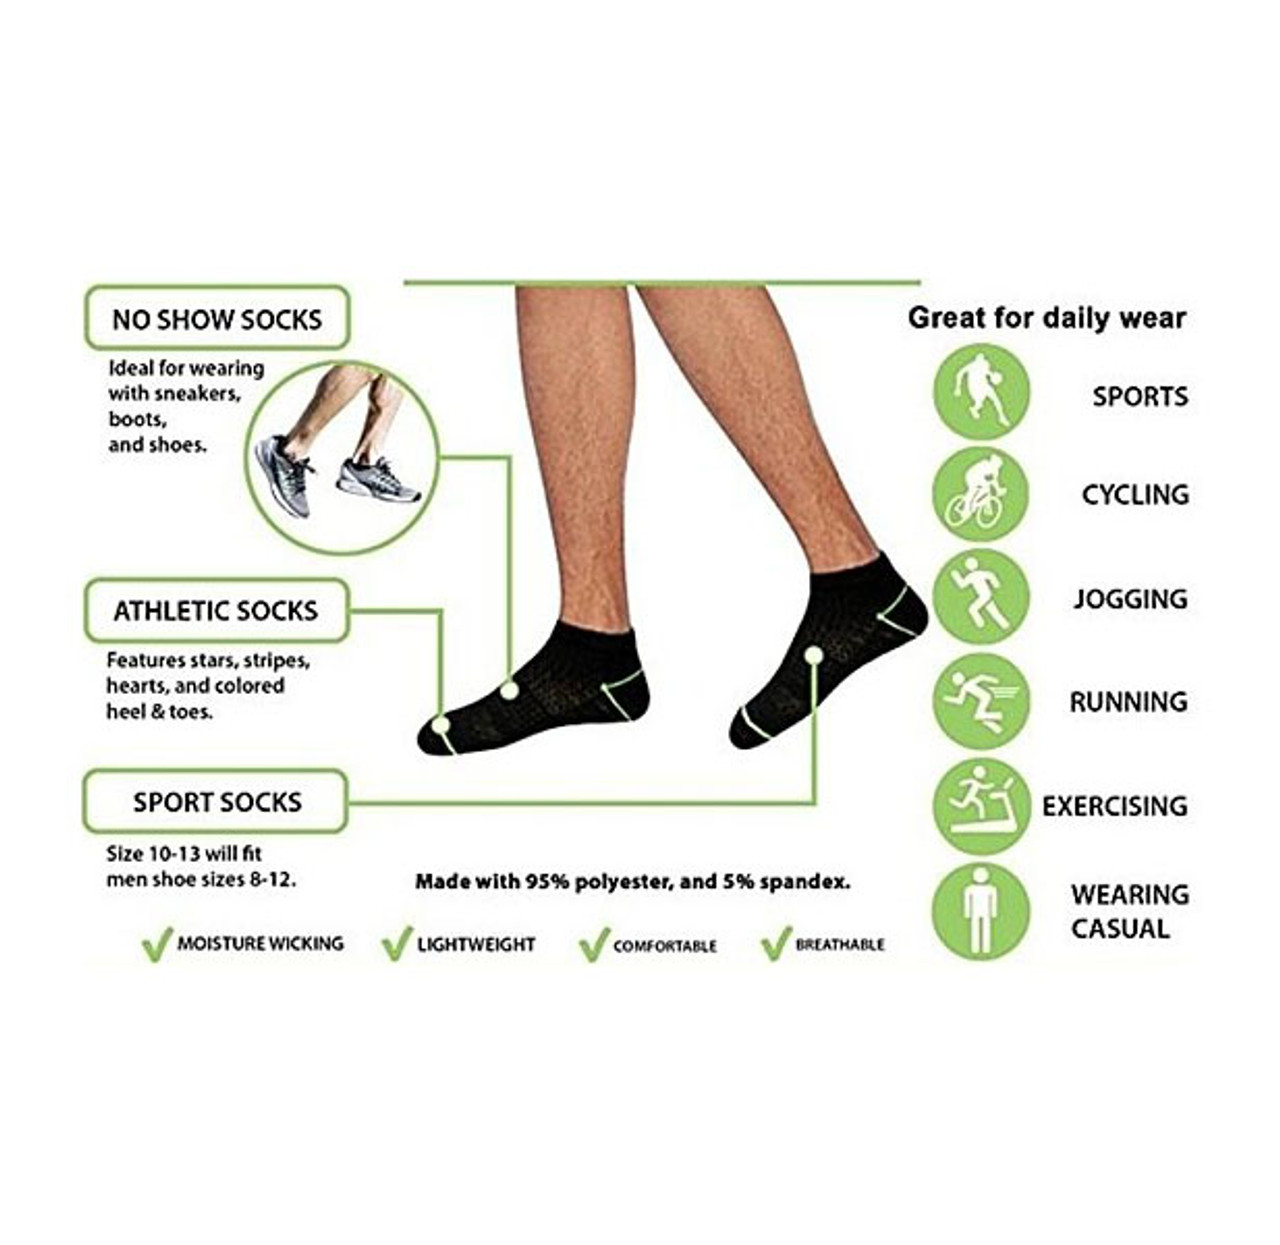 Men's Active Performance Low-Cut Ankle Socks (20- or 50-Pairs) product image